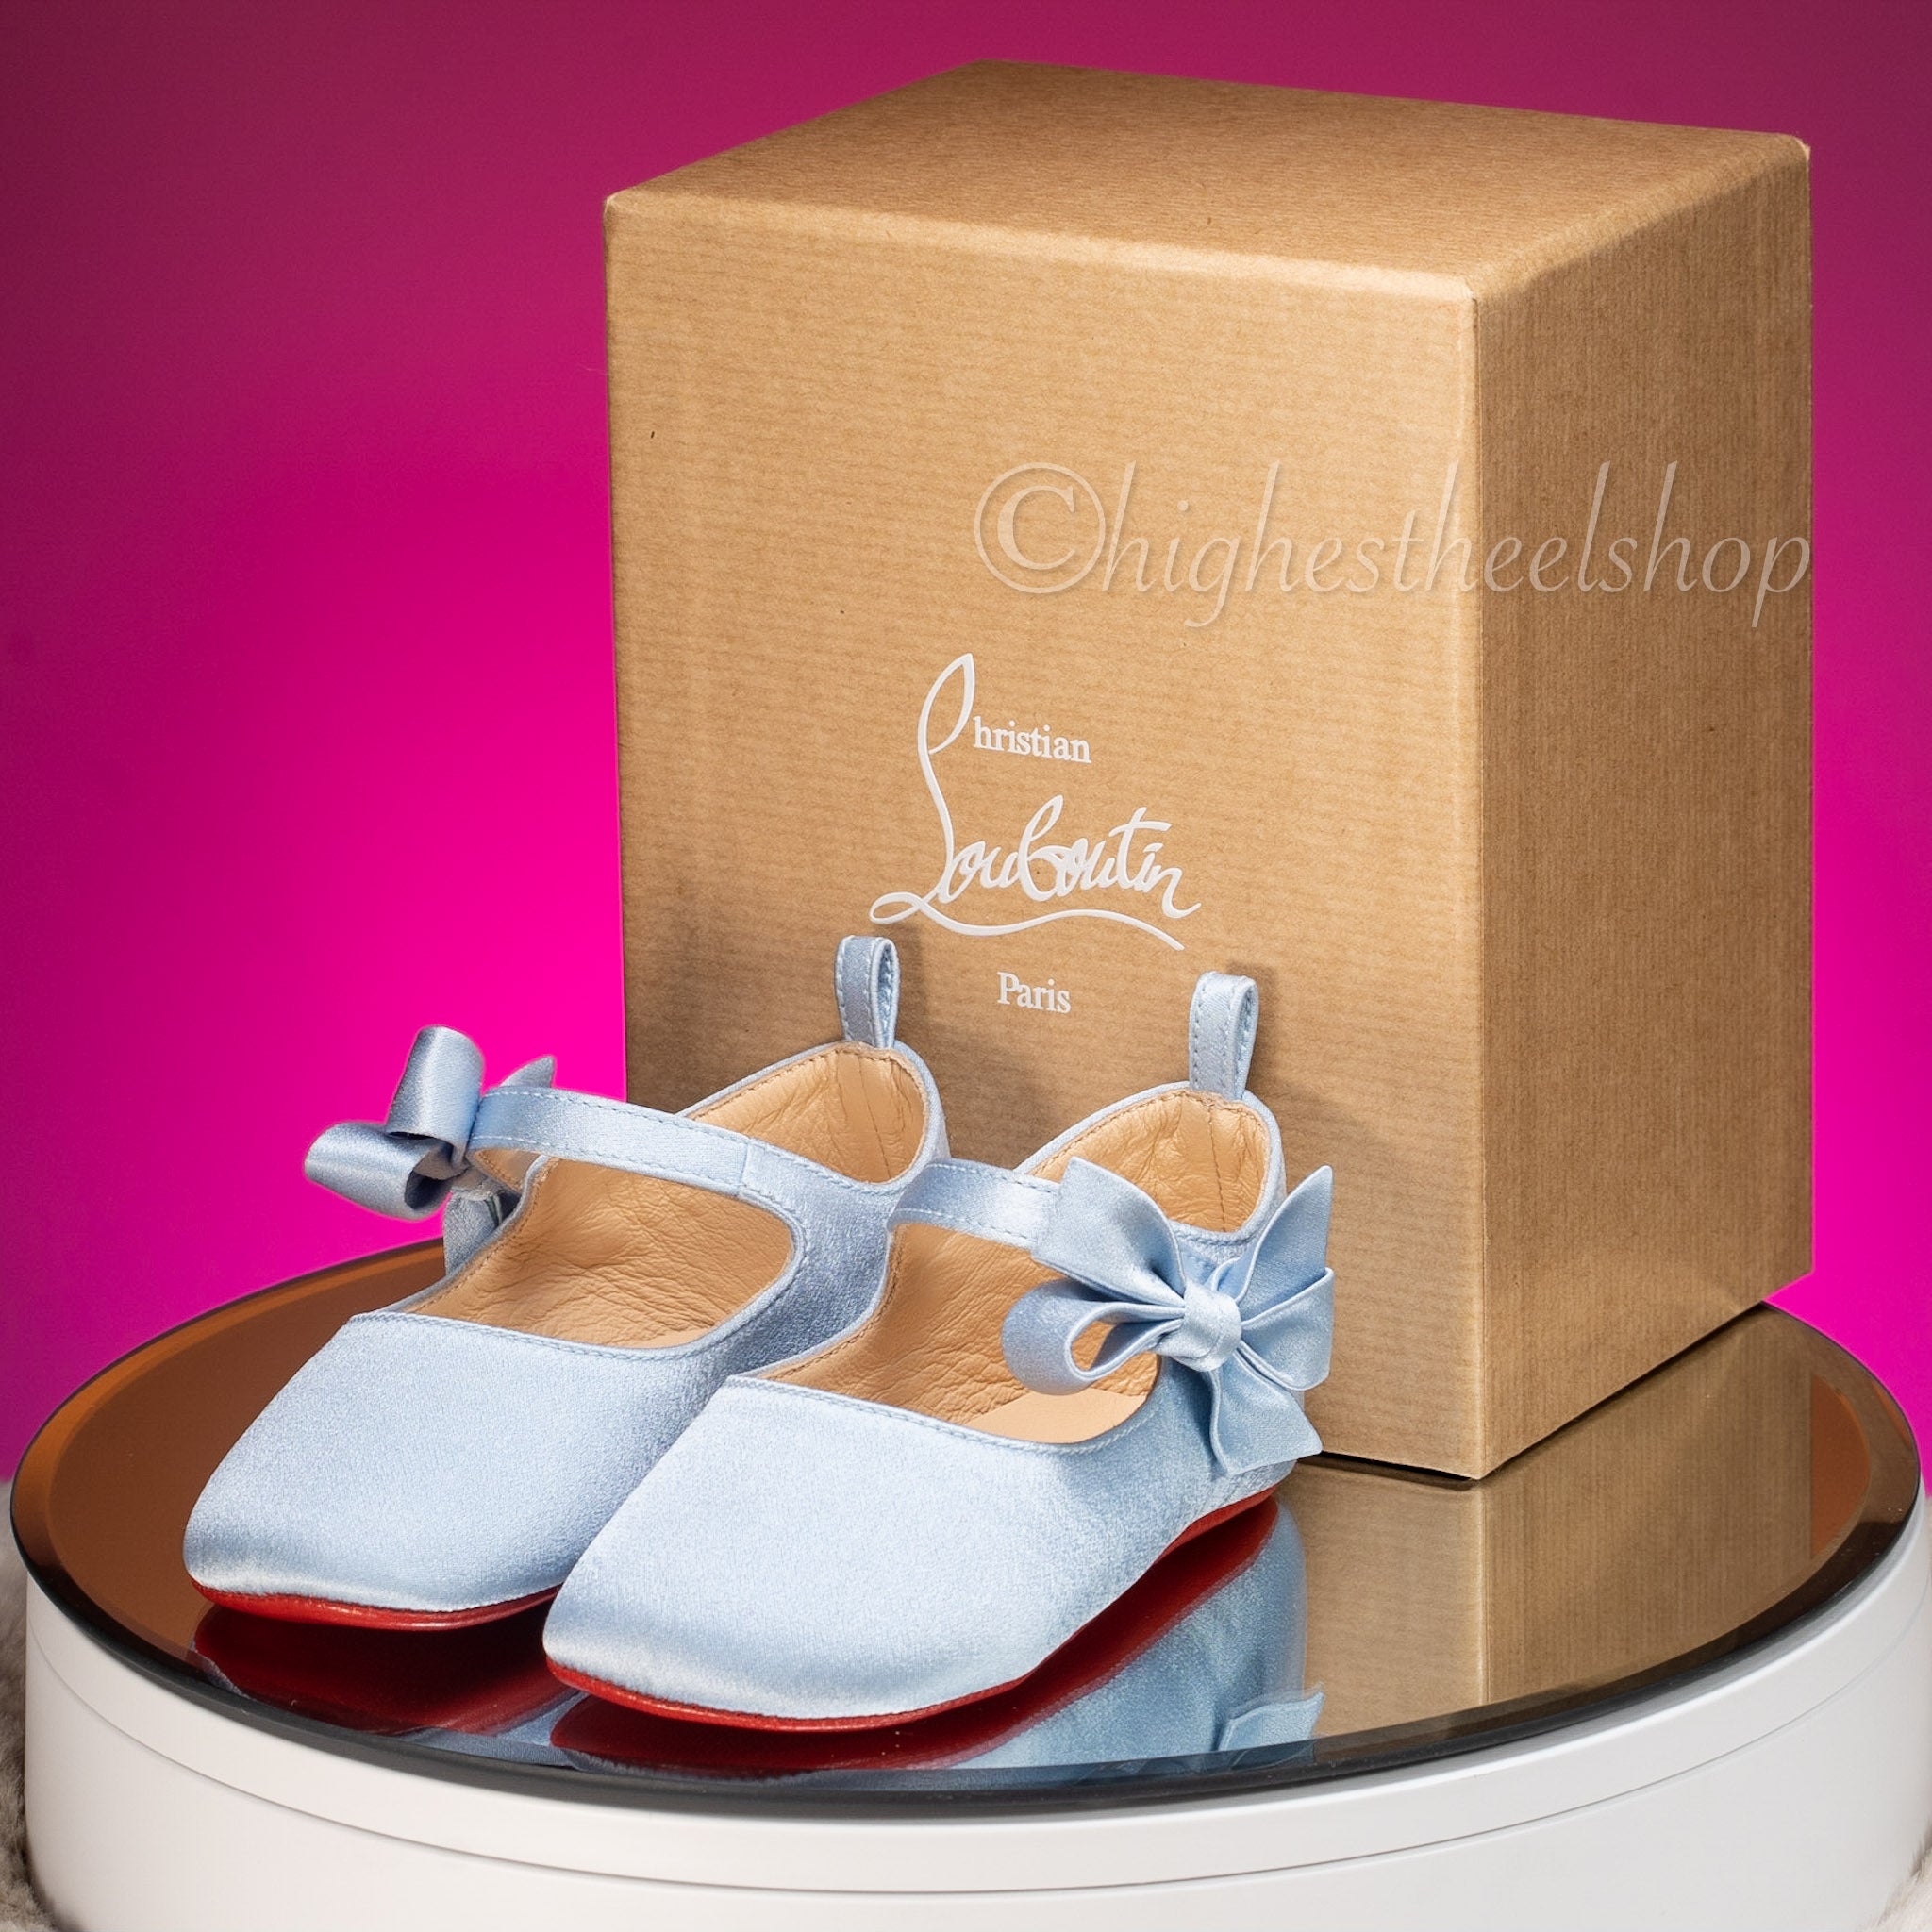 Louboutin Baby shoes in size 18 HighestHeelShop